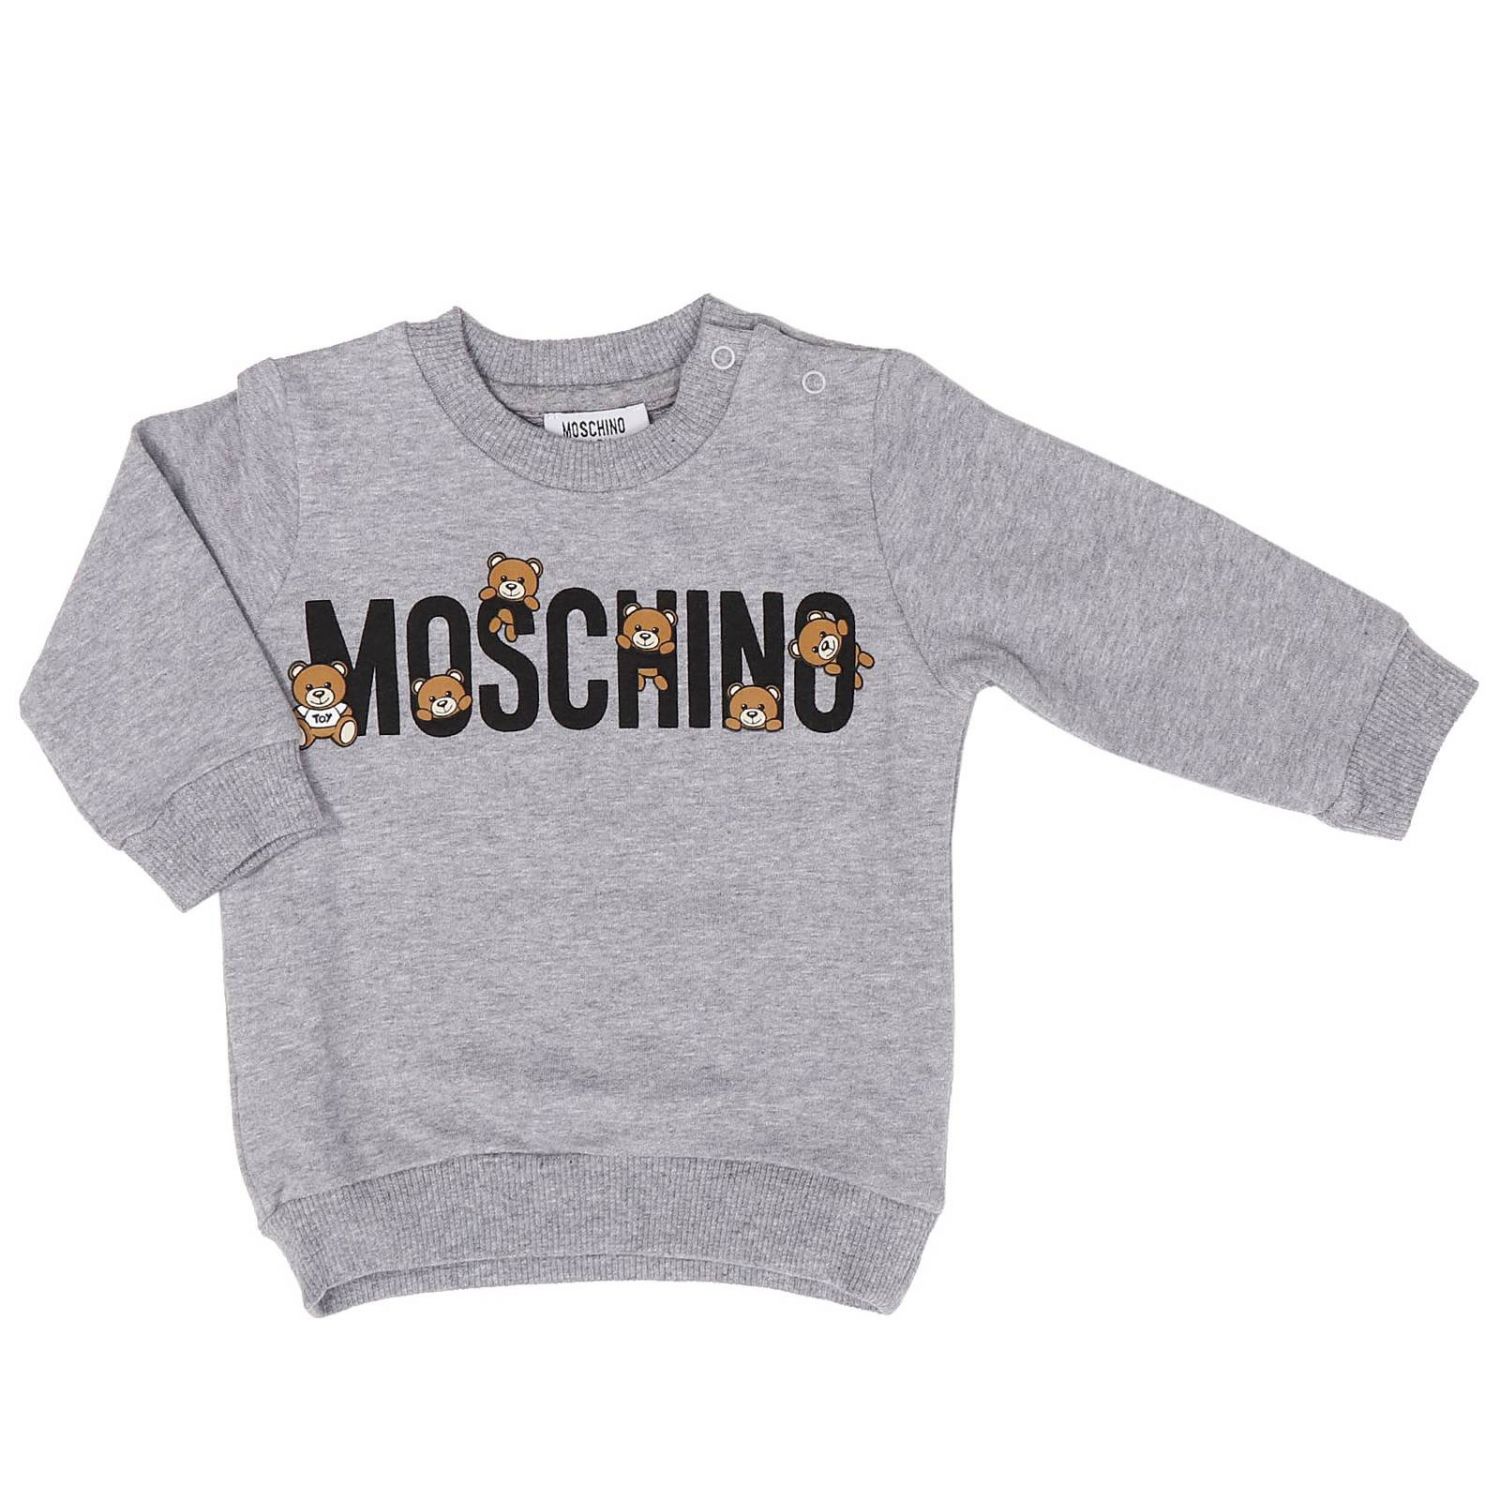 Moschino Baby Outlet: Sweater kids 